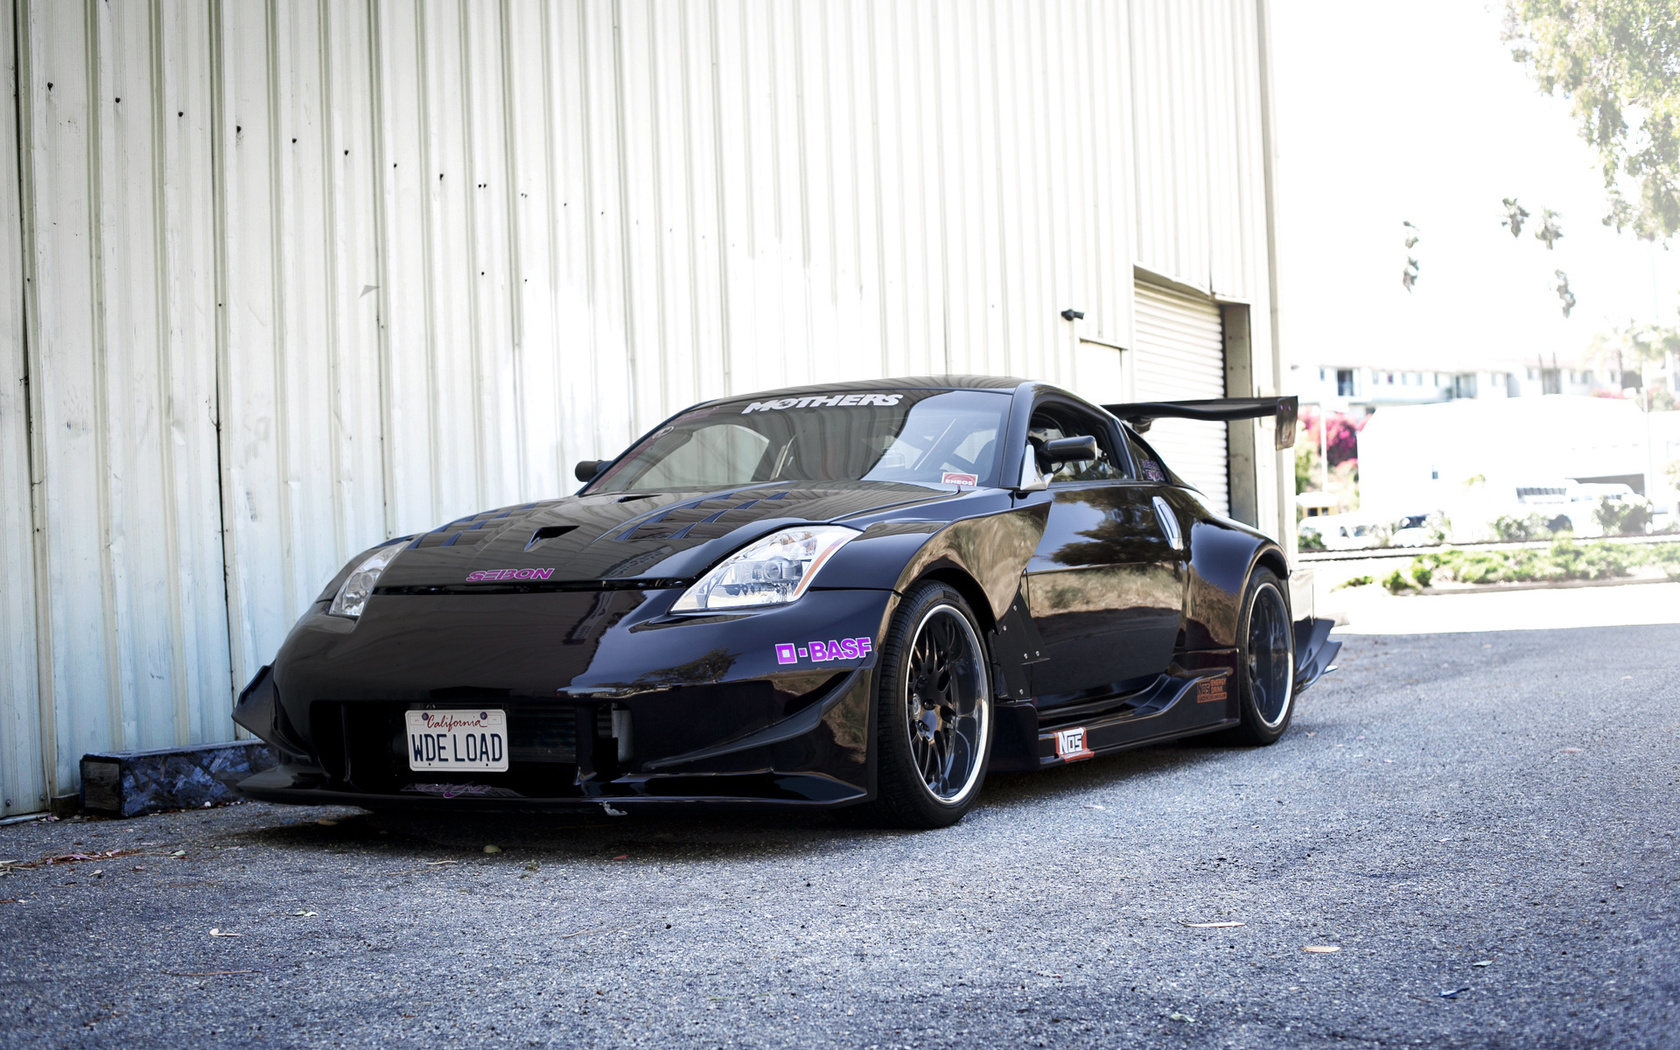 wallpapers auto, 350z, nissan, Auto, race car, cars, tuning cars, tuning auto, nissan 350z